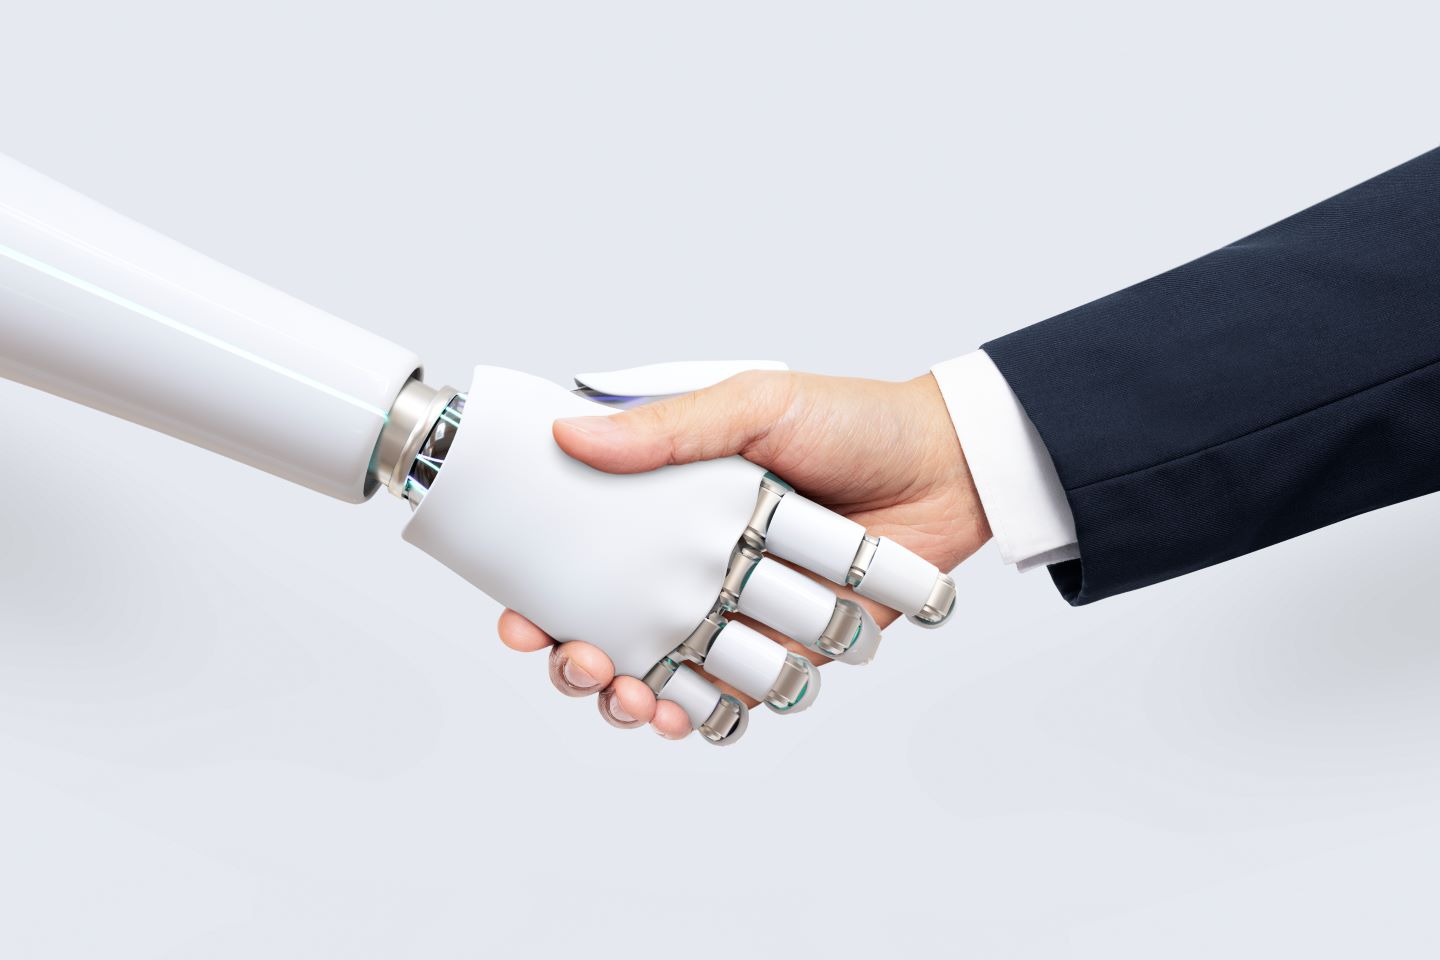 Robot hand and human hand shaking hands